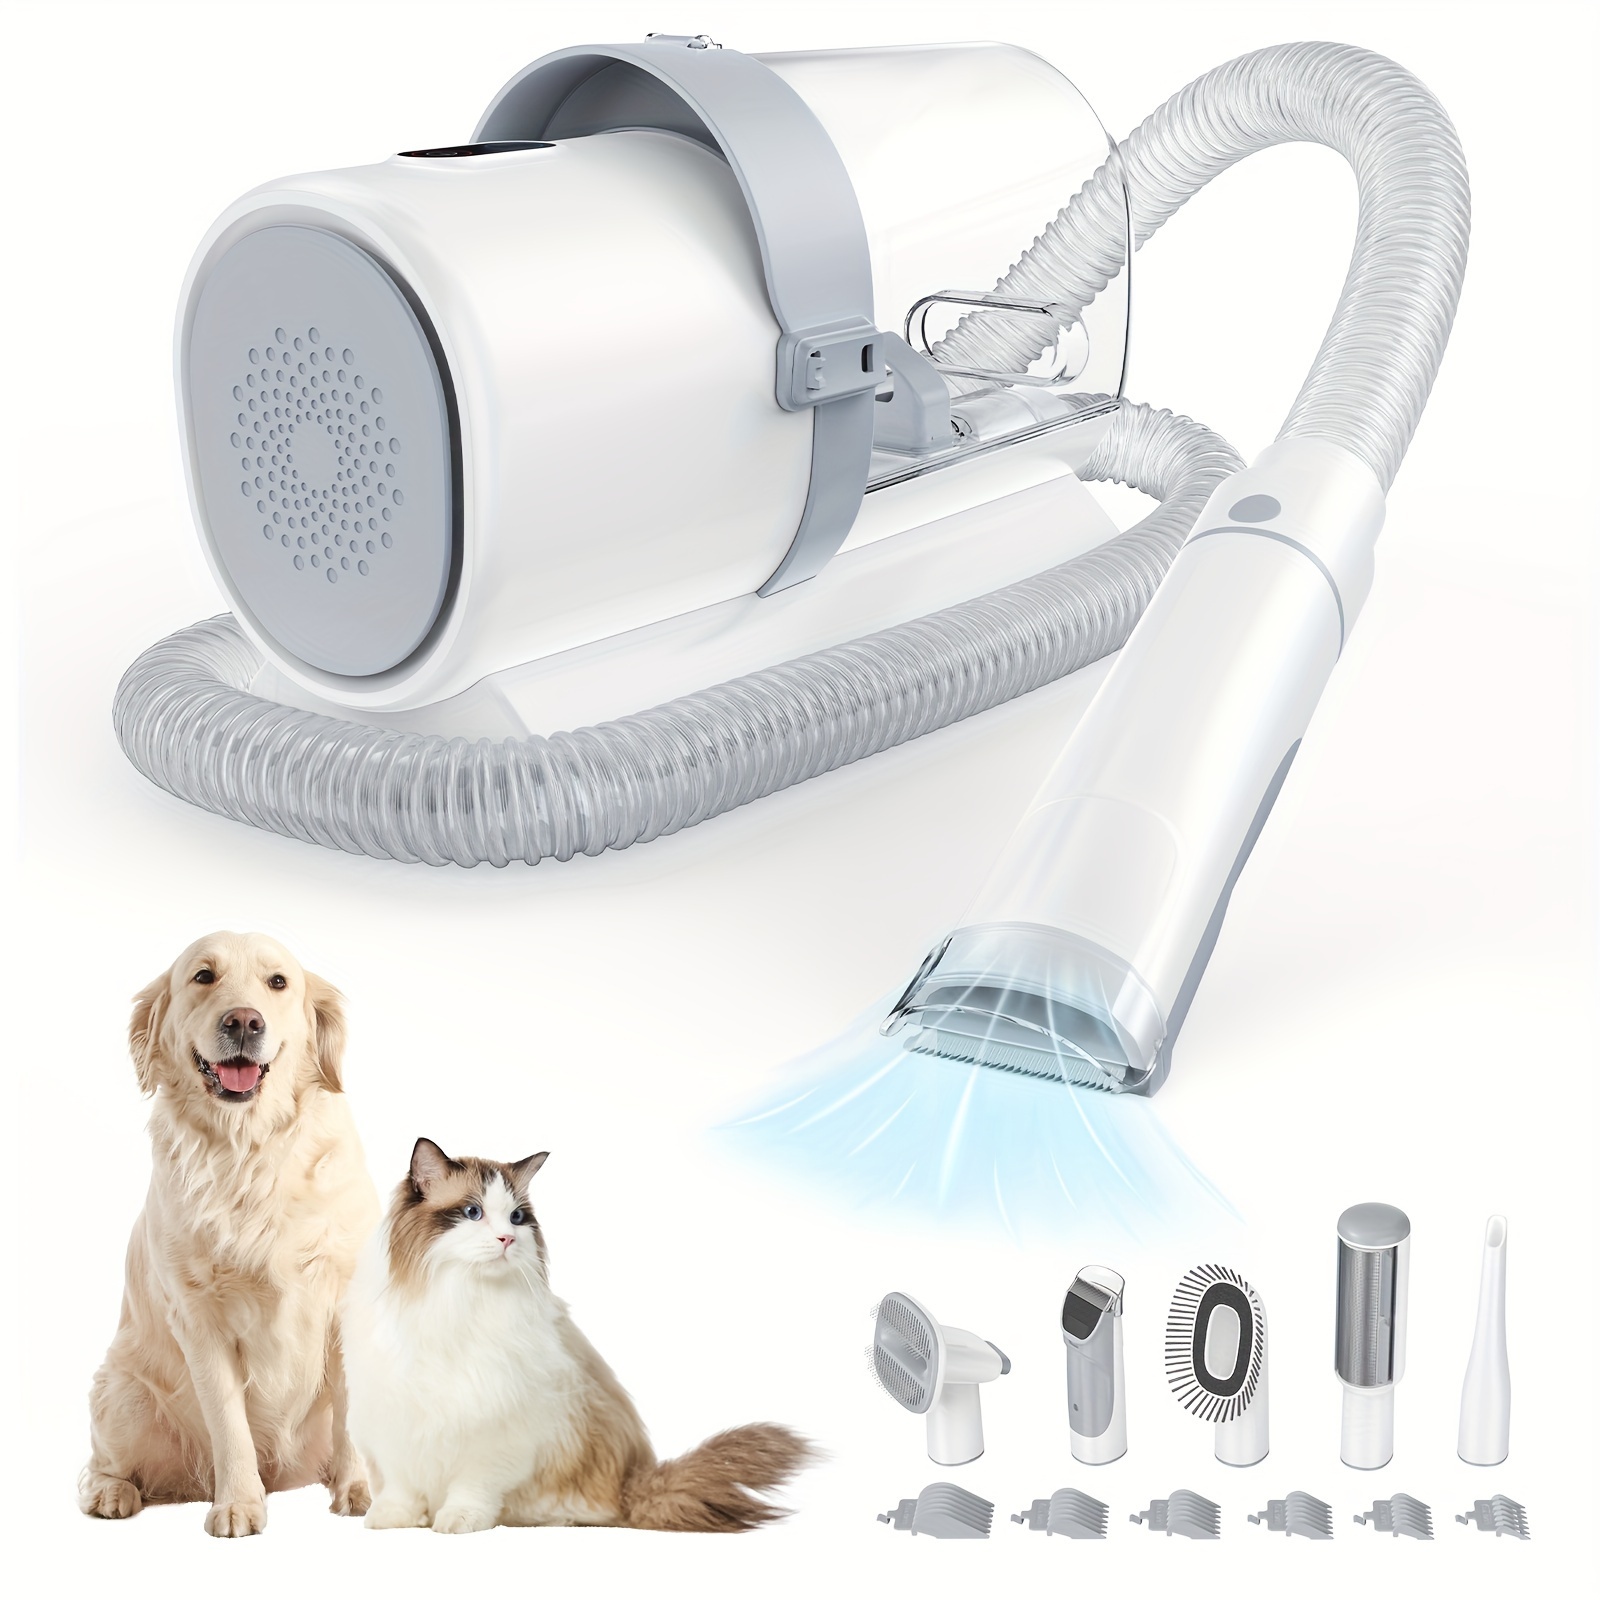 

Pet Grooming Vacuum Kit 5 In 1, Dog Hair Clipper Set, Vacuum Suction Strong Power 99% Pet Hair, Professional Clippers With 6 Guide Combs, Mulifunctional Grooming Tools For Dogs Cats And Other Animals